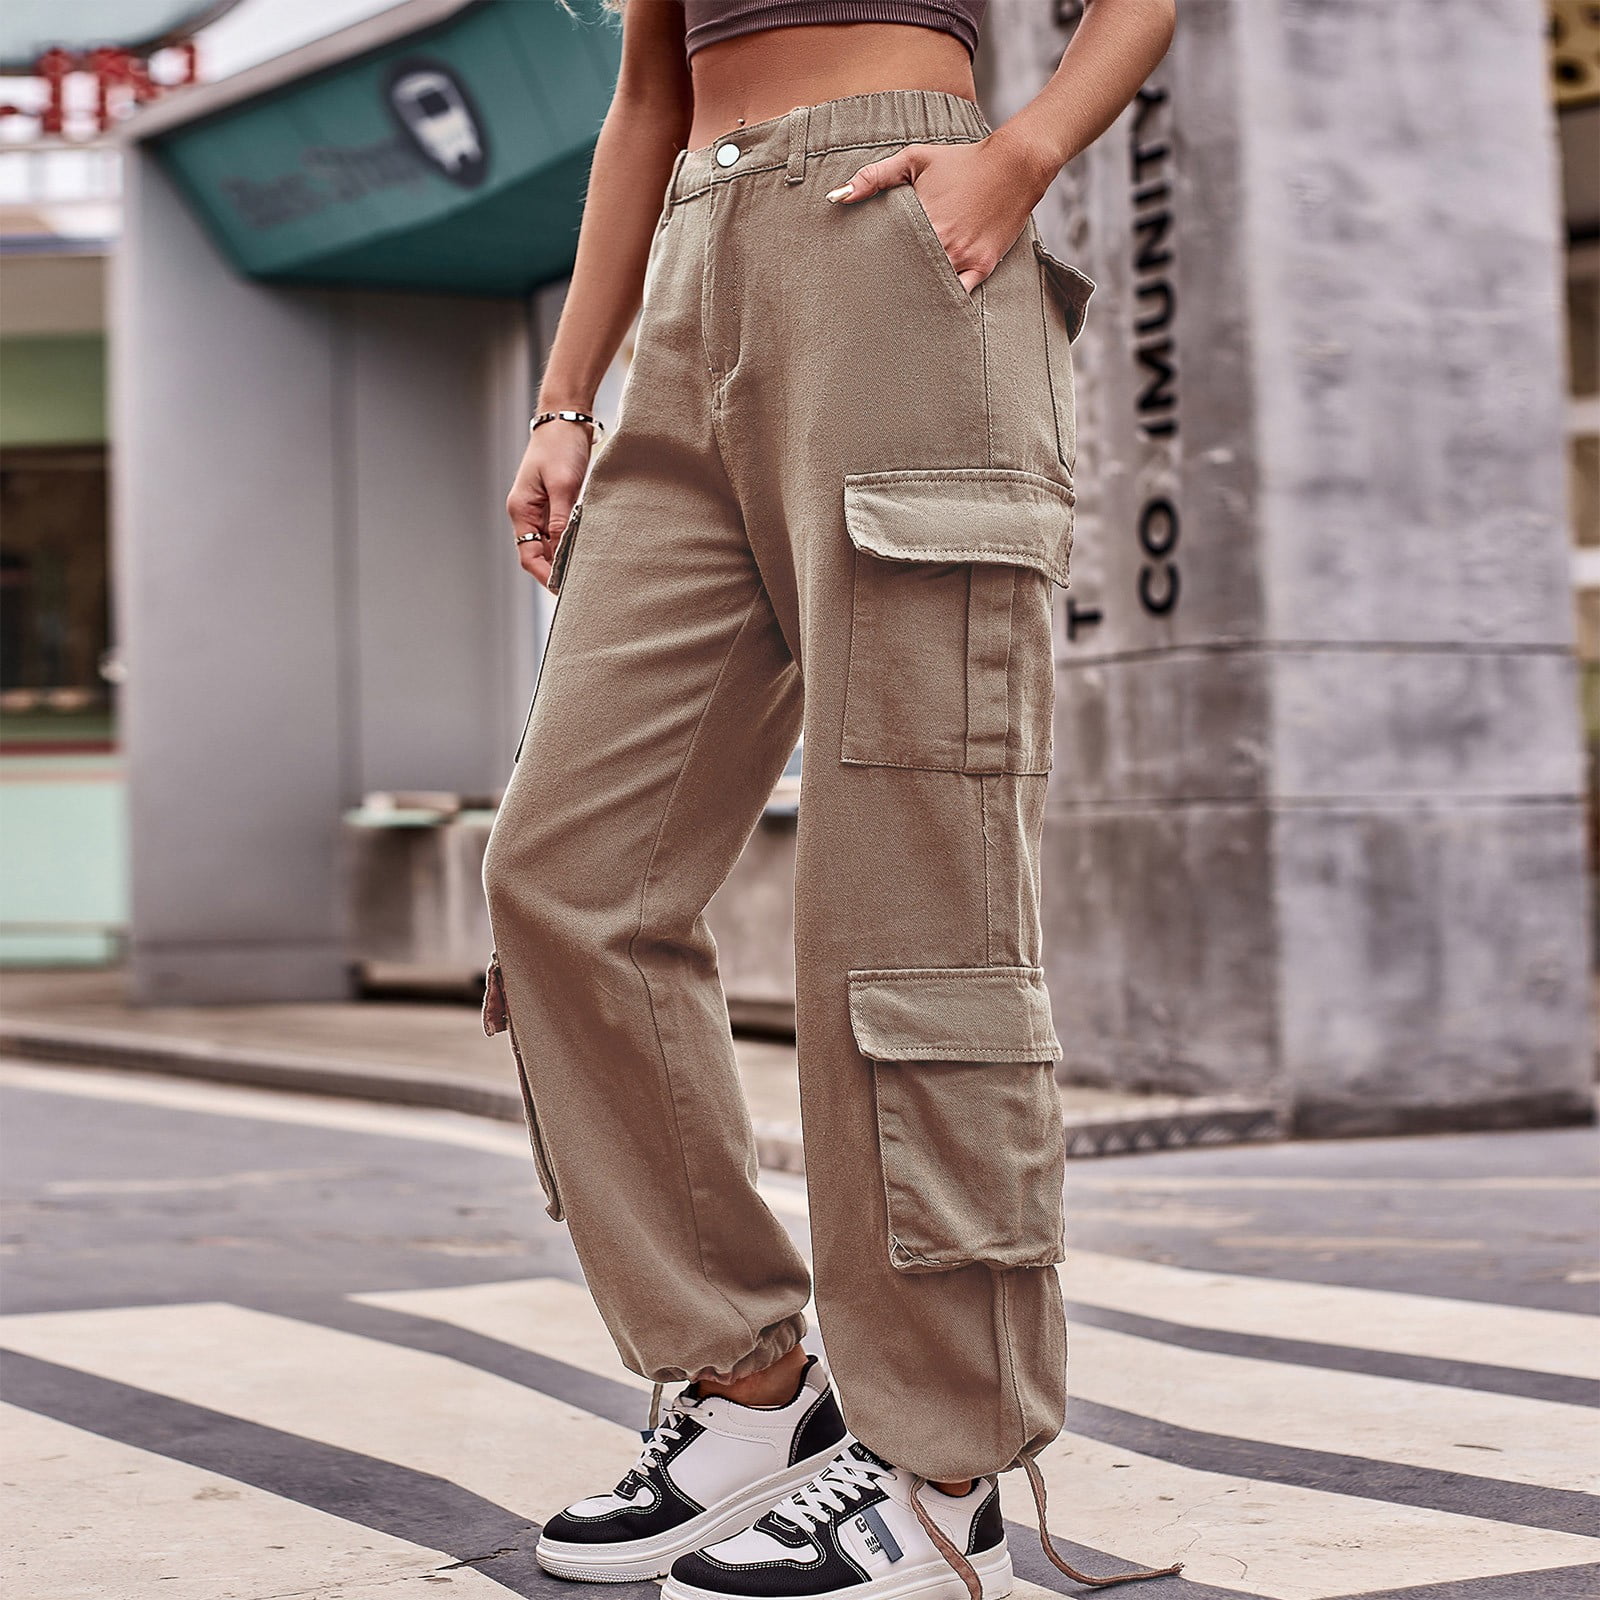 HIMIWAY Pants Women Palazzo Pants for Women Women's Fashion Casual Solid Color Drawstring Jeans Overalls Sports Pants Khaki C S -